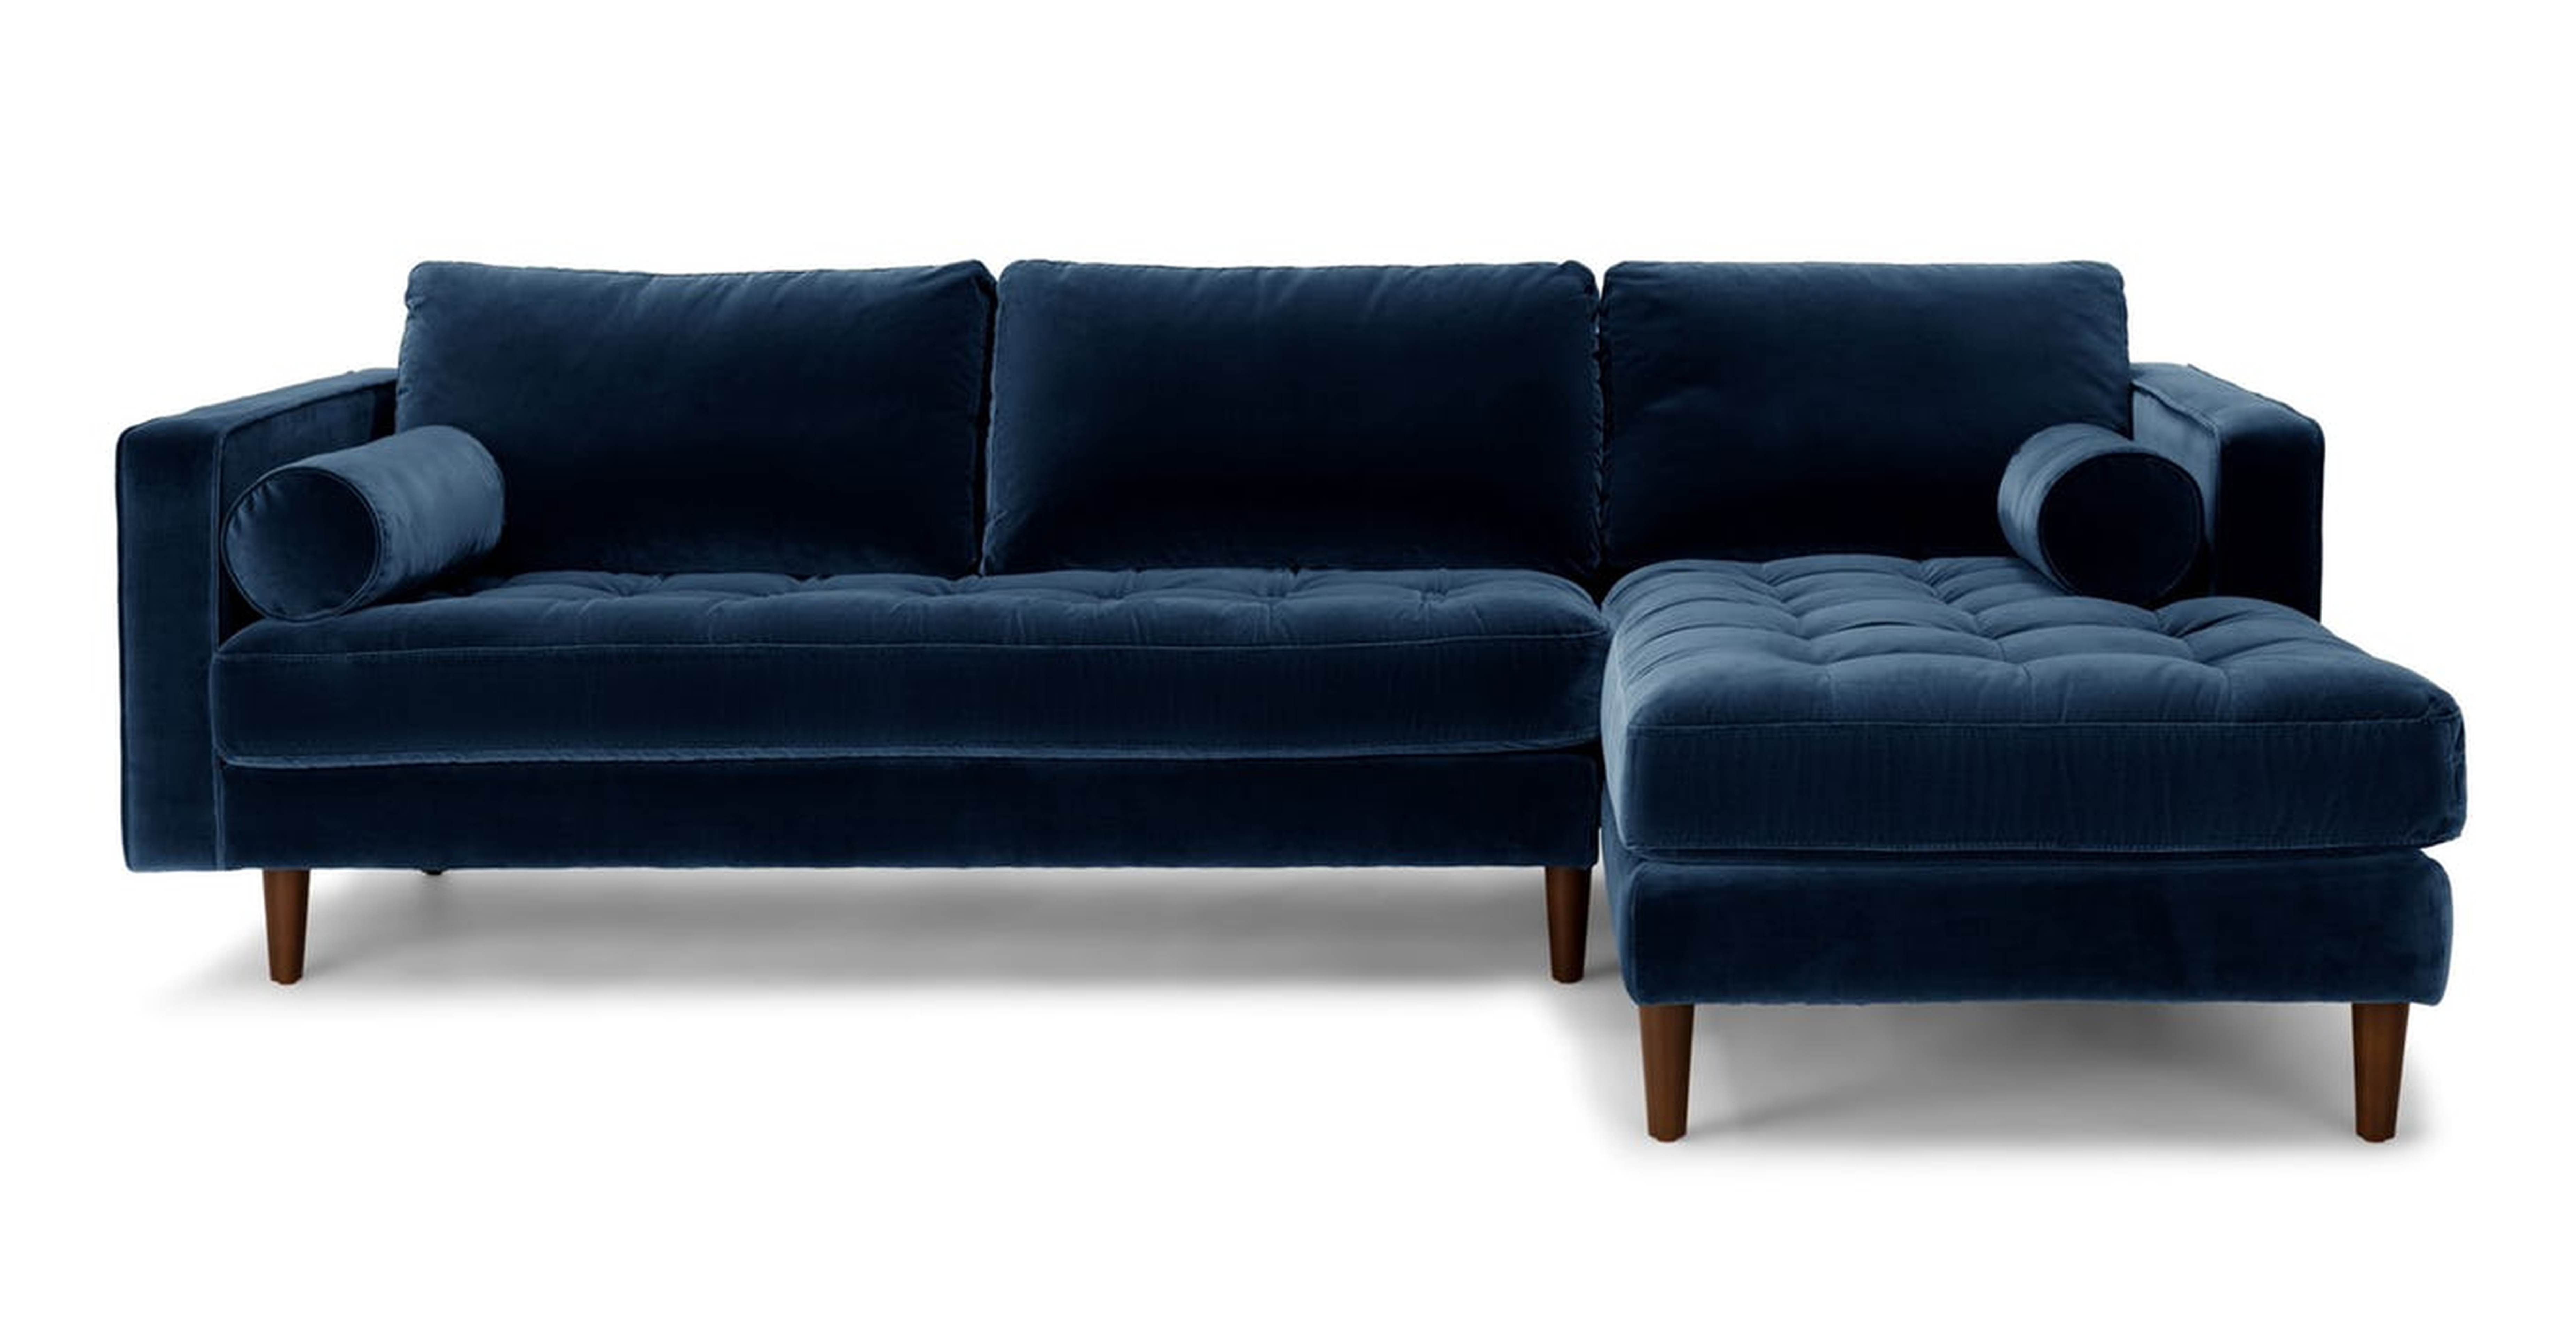 Sven Cascadia Blue Right Sectional Sofa - Article